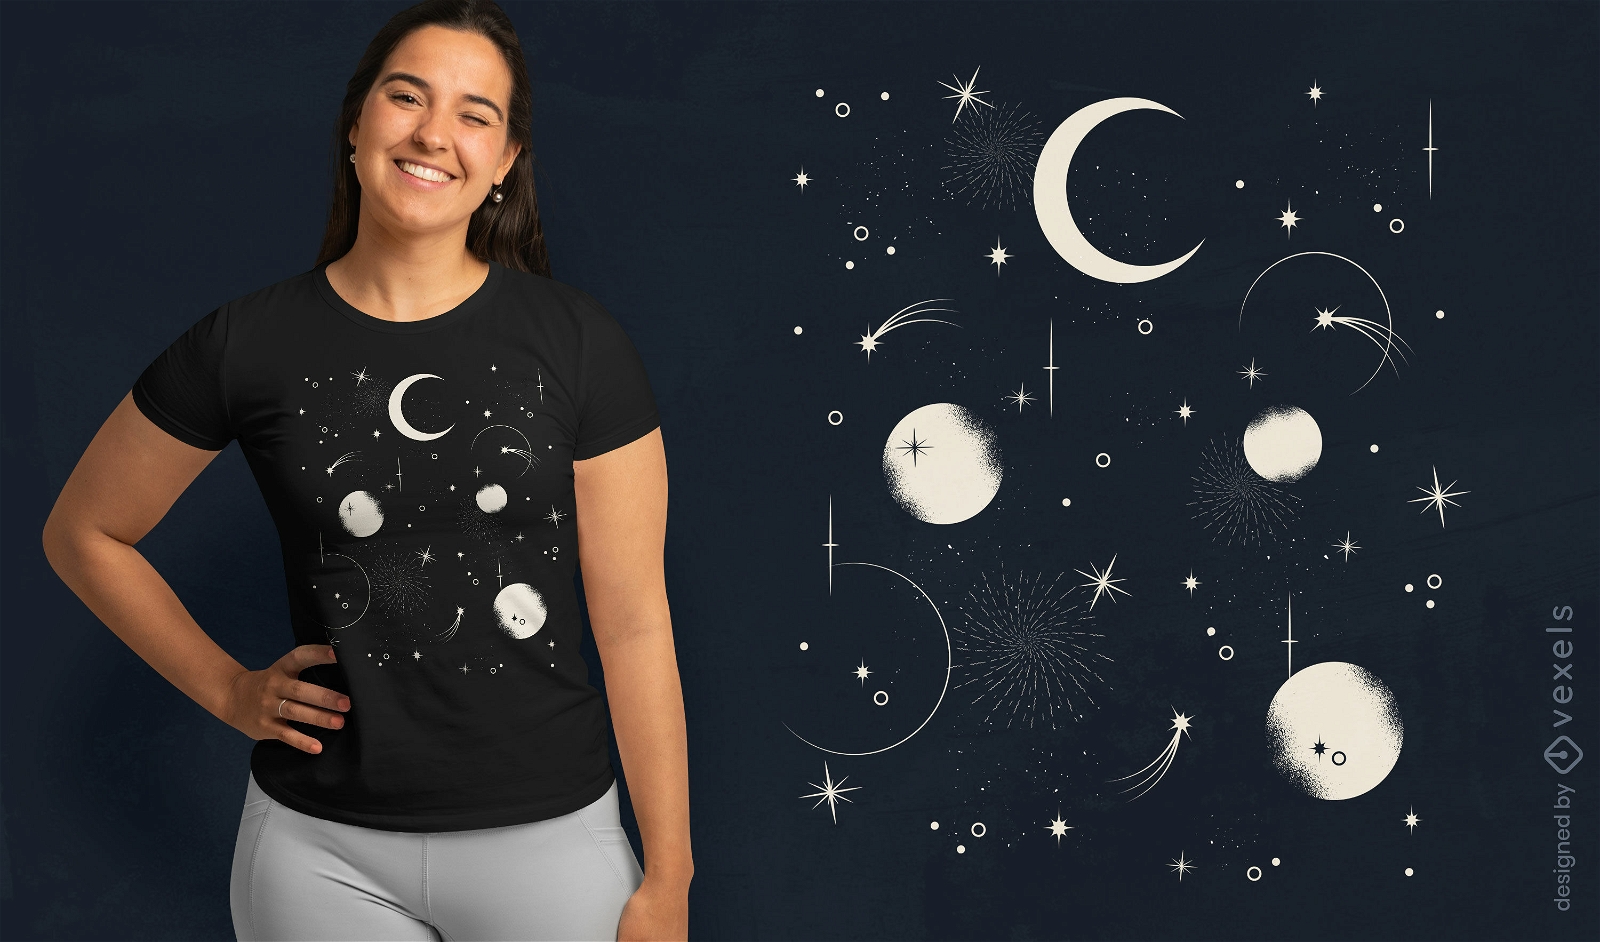 Moon and stars in the night sky t-shirt design